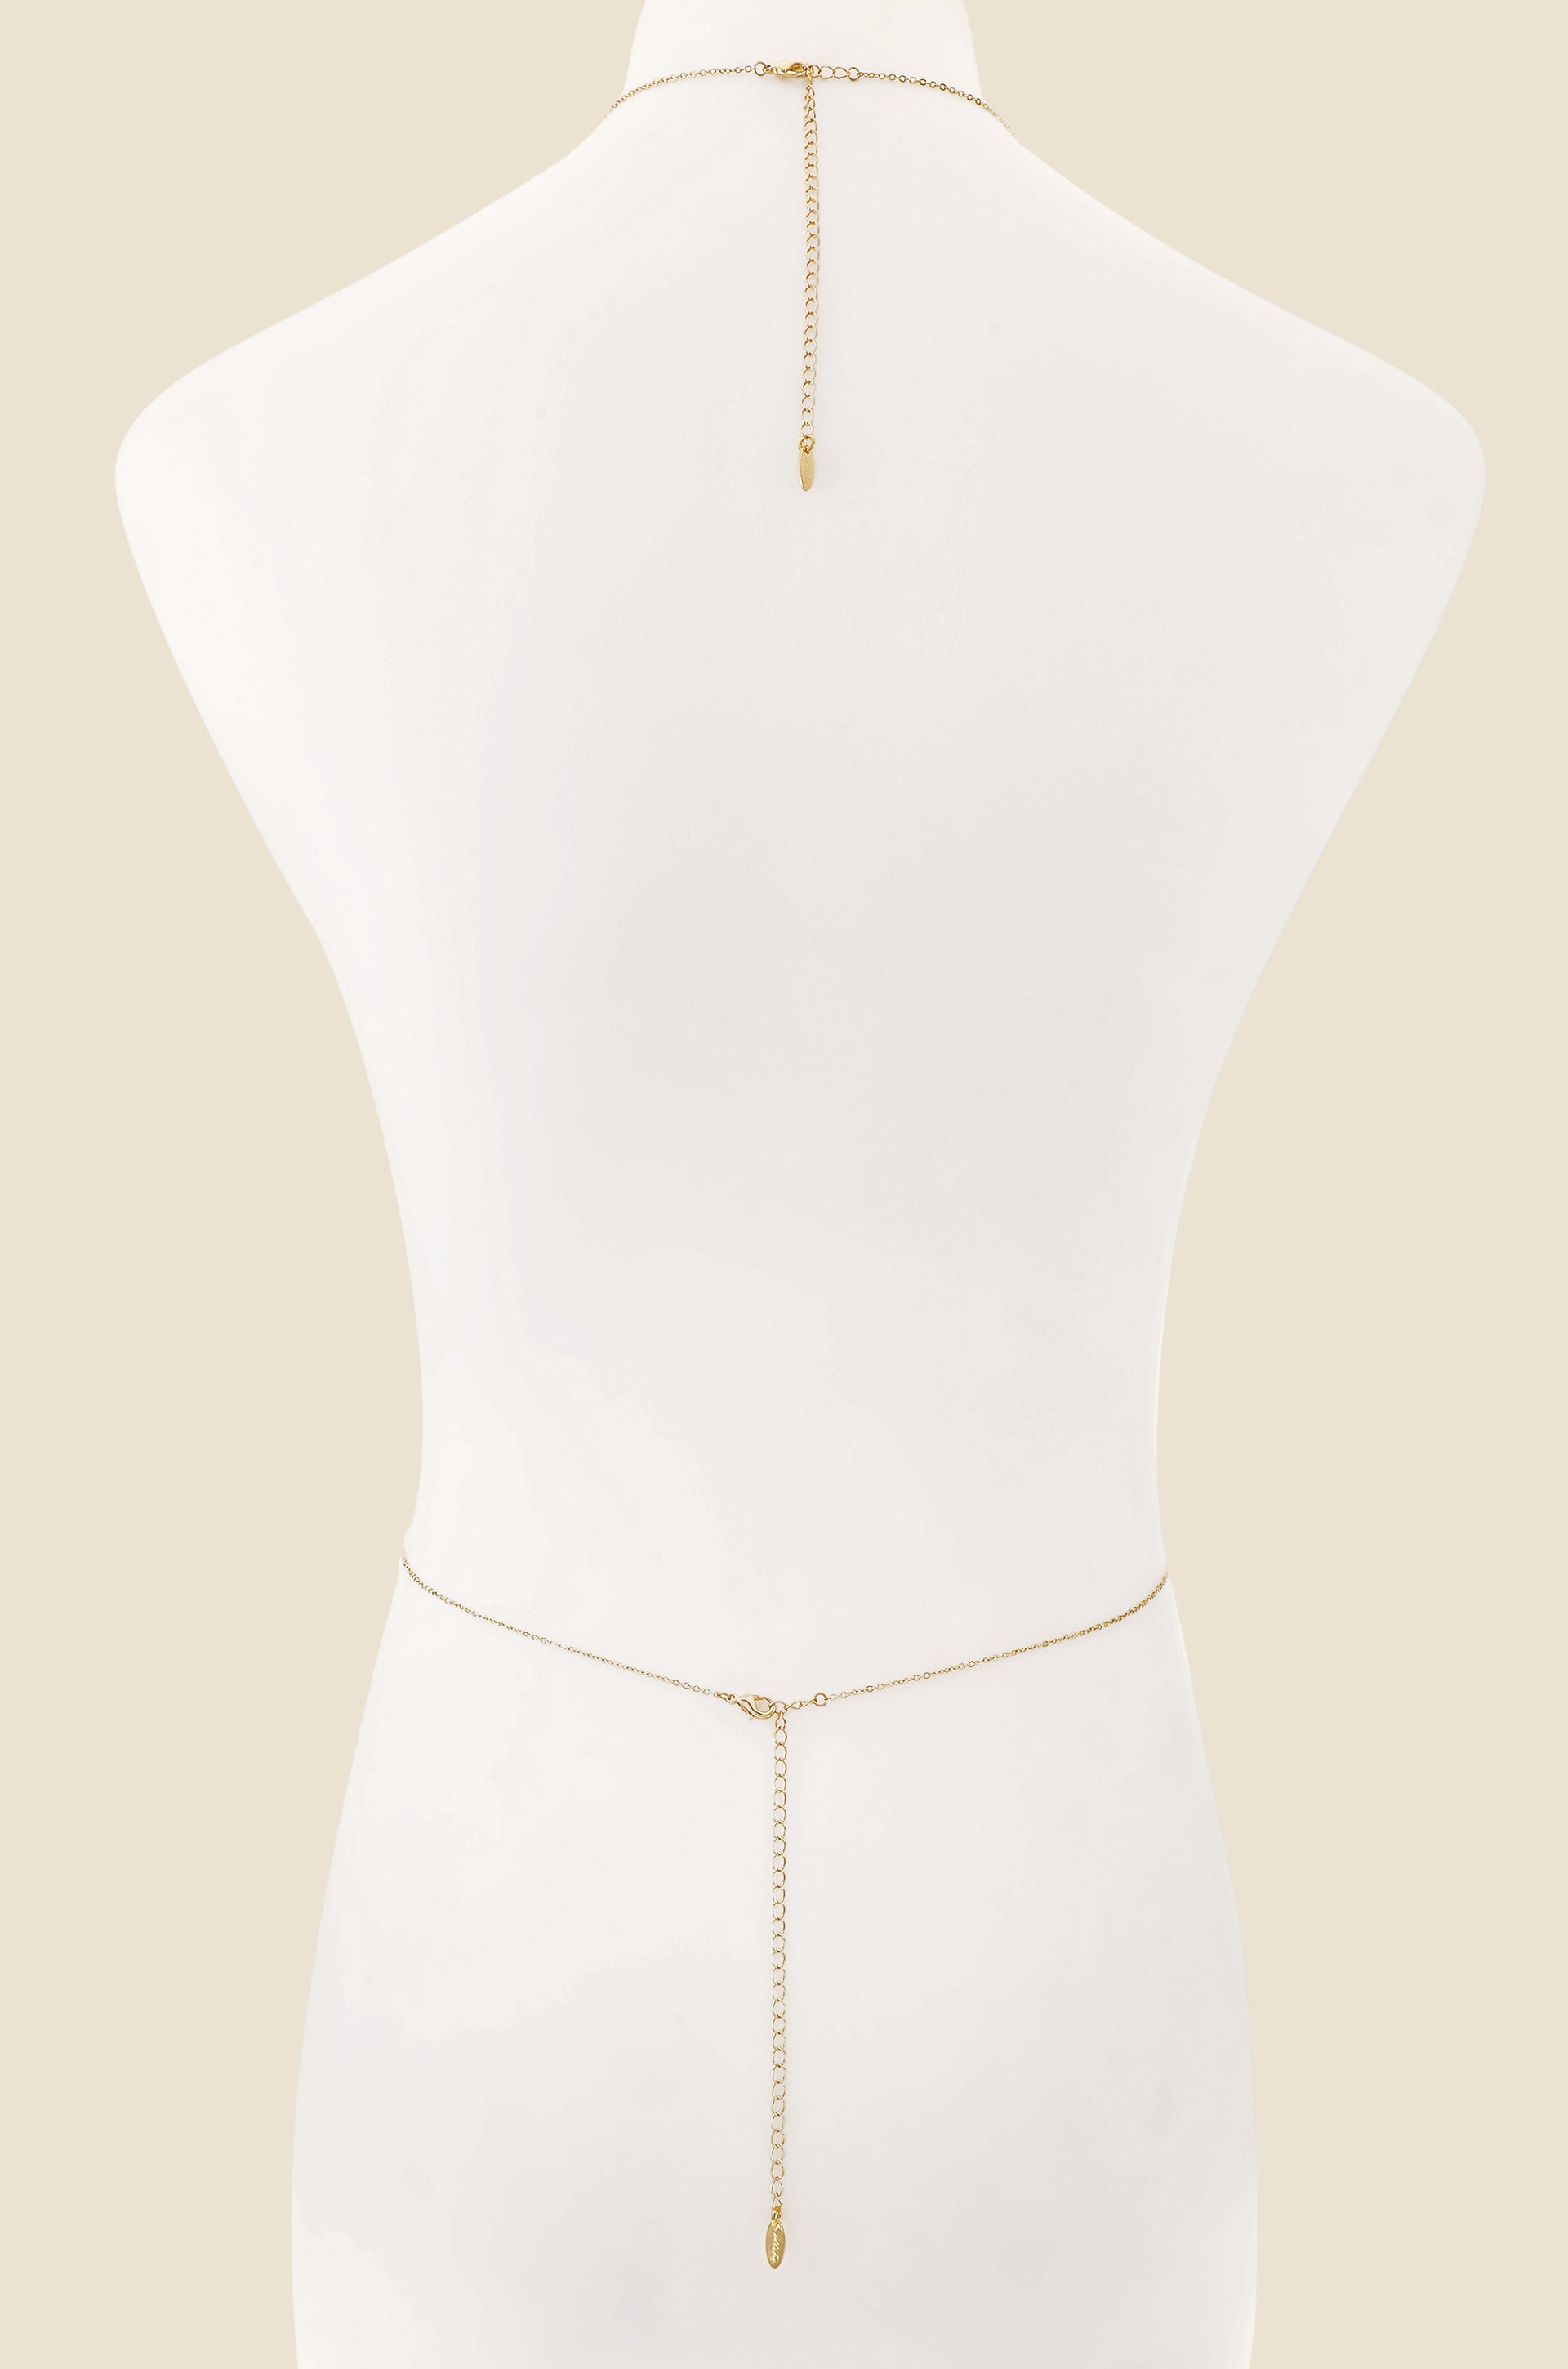 How to DIY a sexy bra body chain with delicate gold chains